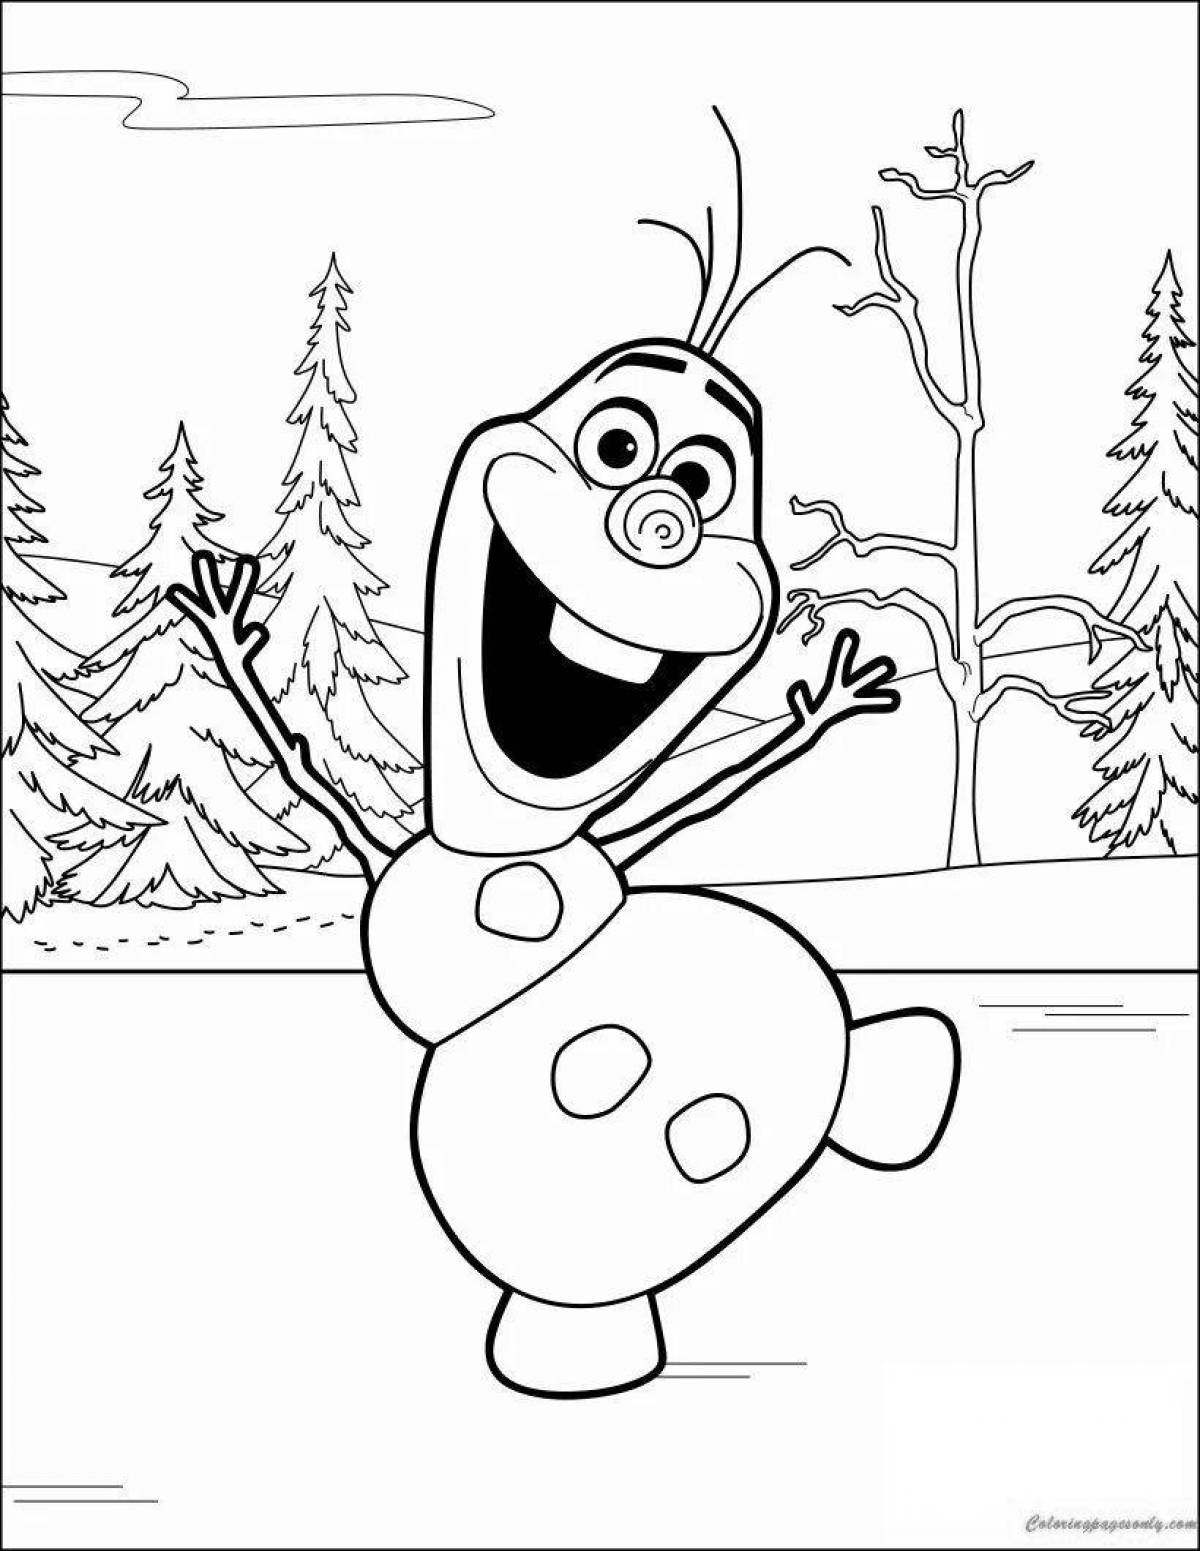 Animated coloring of Olaf the snowman